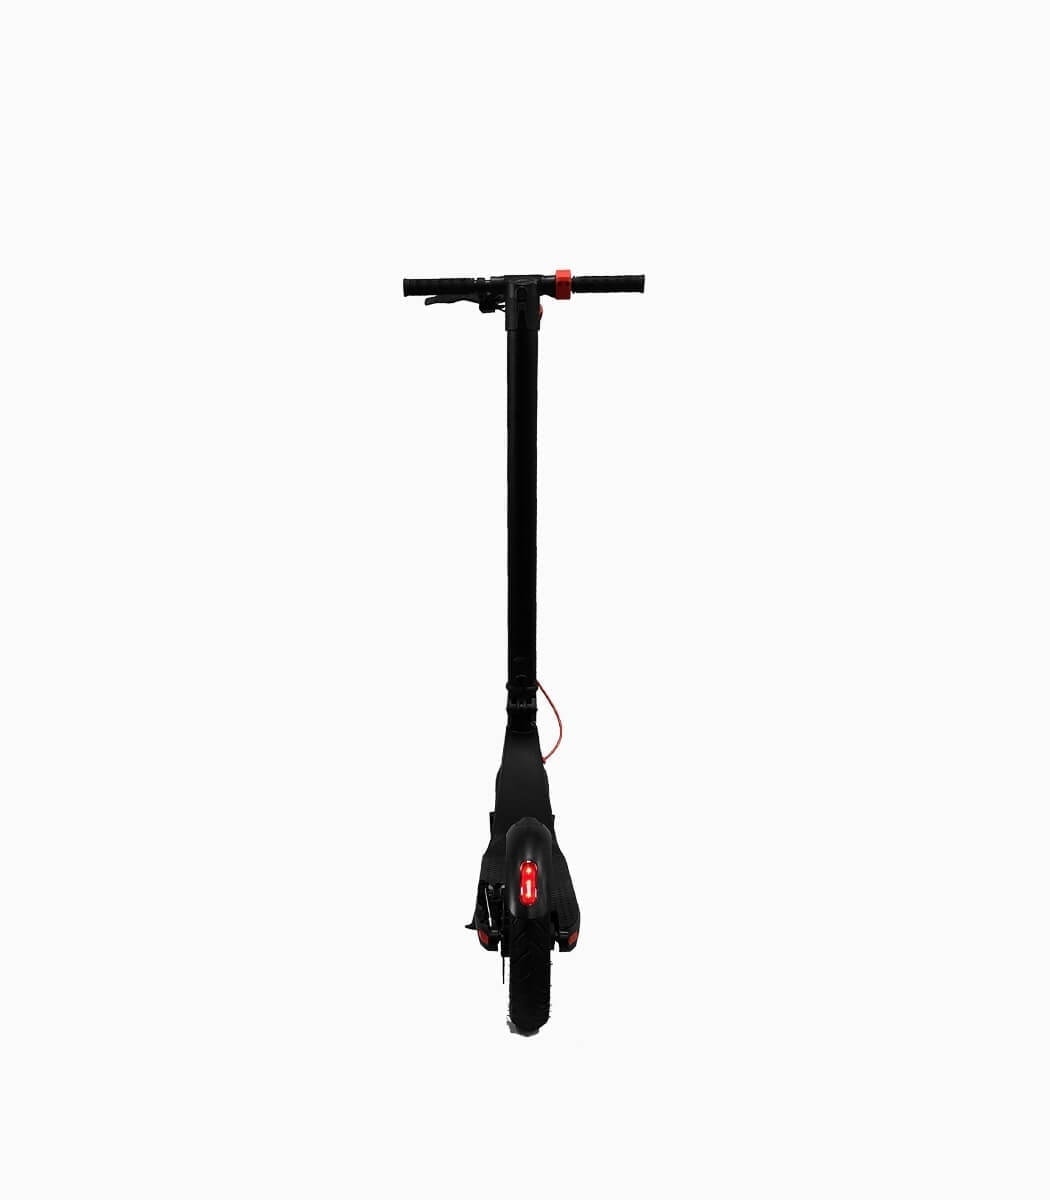 MOBOT X7 (BLACK6.4AH) UL2272 electric scooter rear